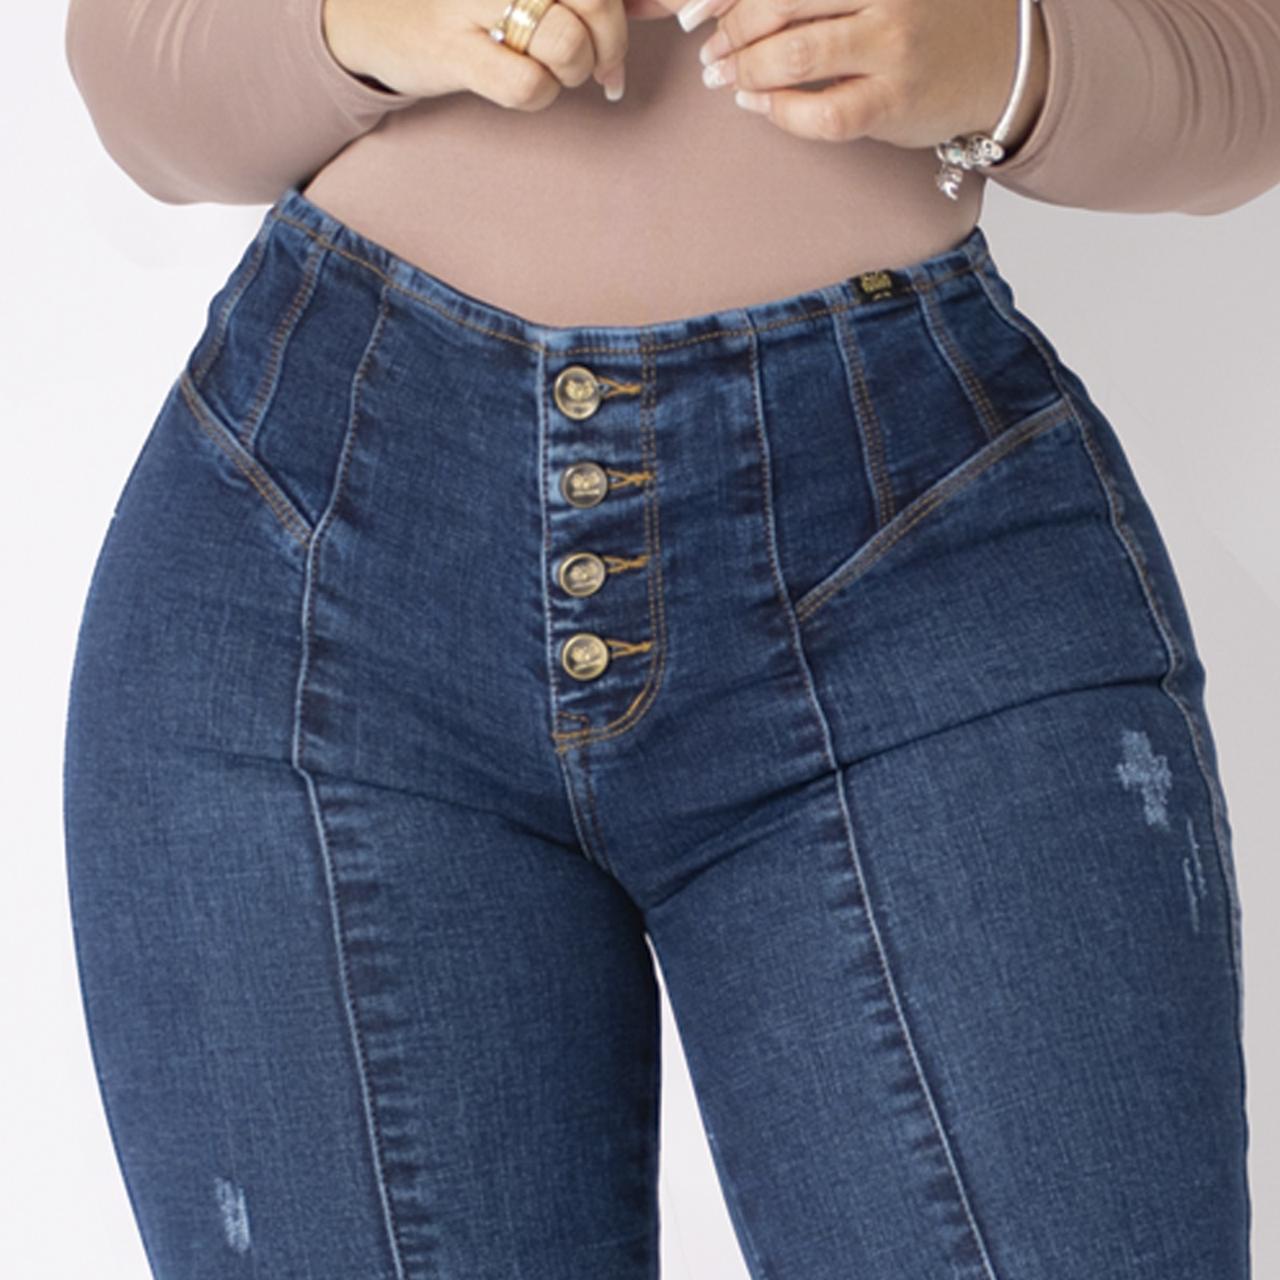 Jeans Mujer escultor 4148